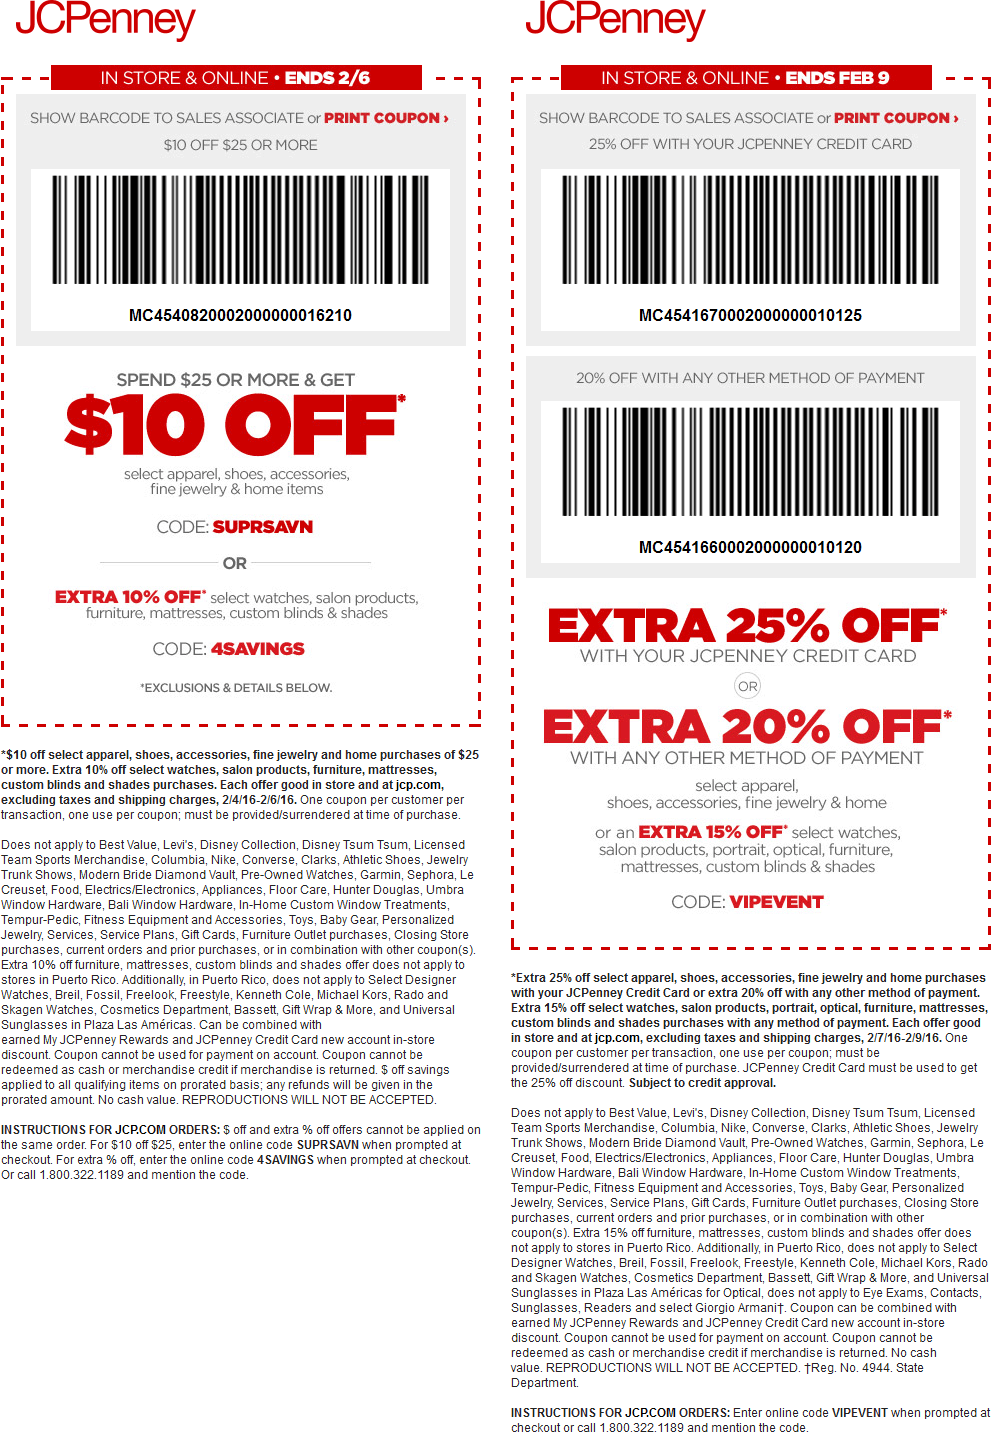 jcpenney portrait coupons free sitting fee